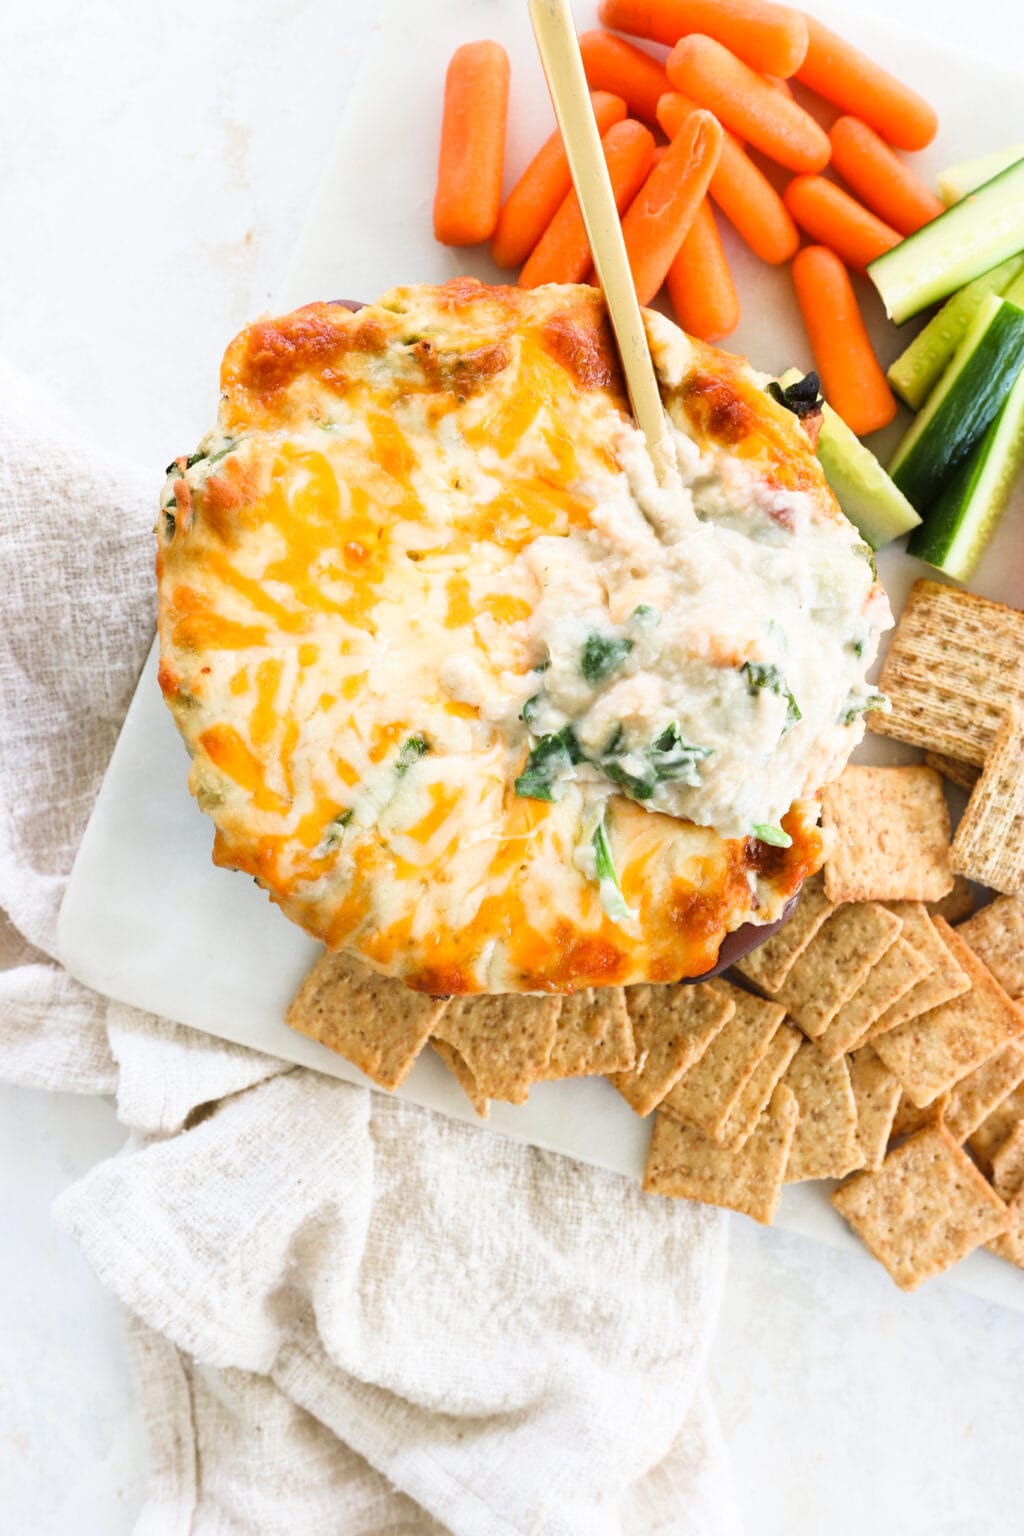 A dish of healthy white bean, spinach and artichoke dip on a white platter with crackers, cucumbers, and carrots for dipping